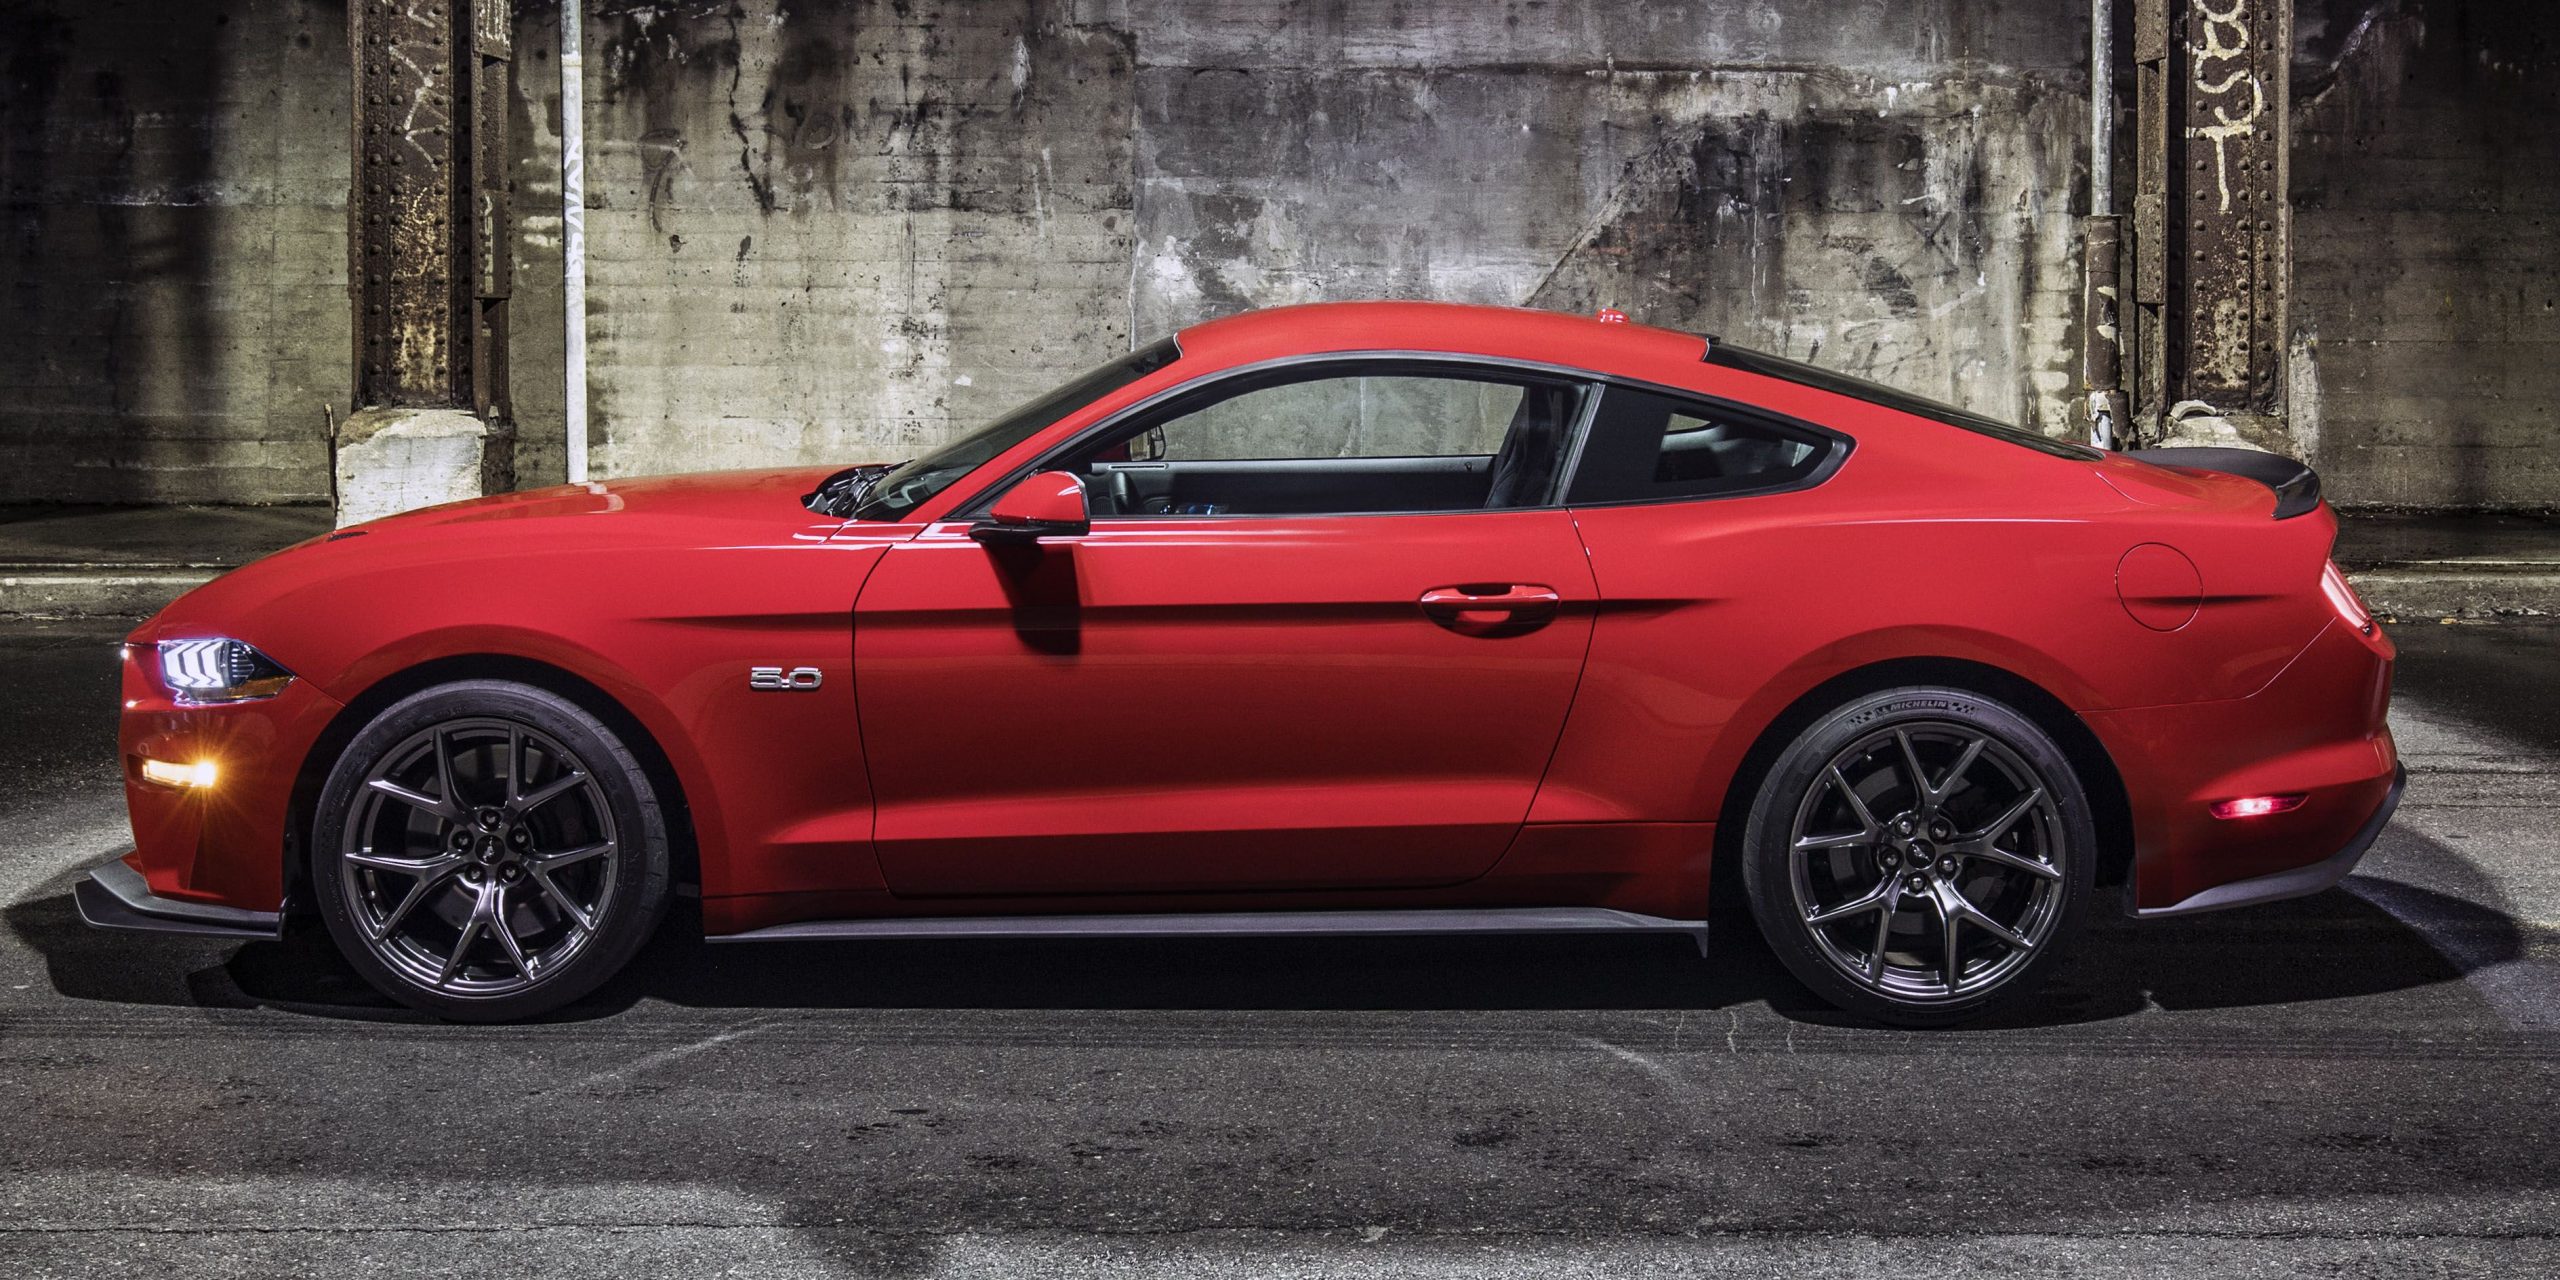 S550 Mustang PP1 Spoiler Now Available